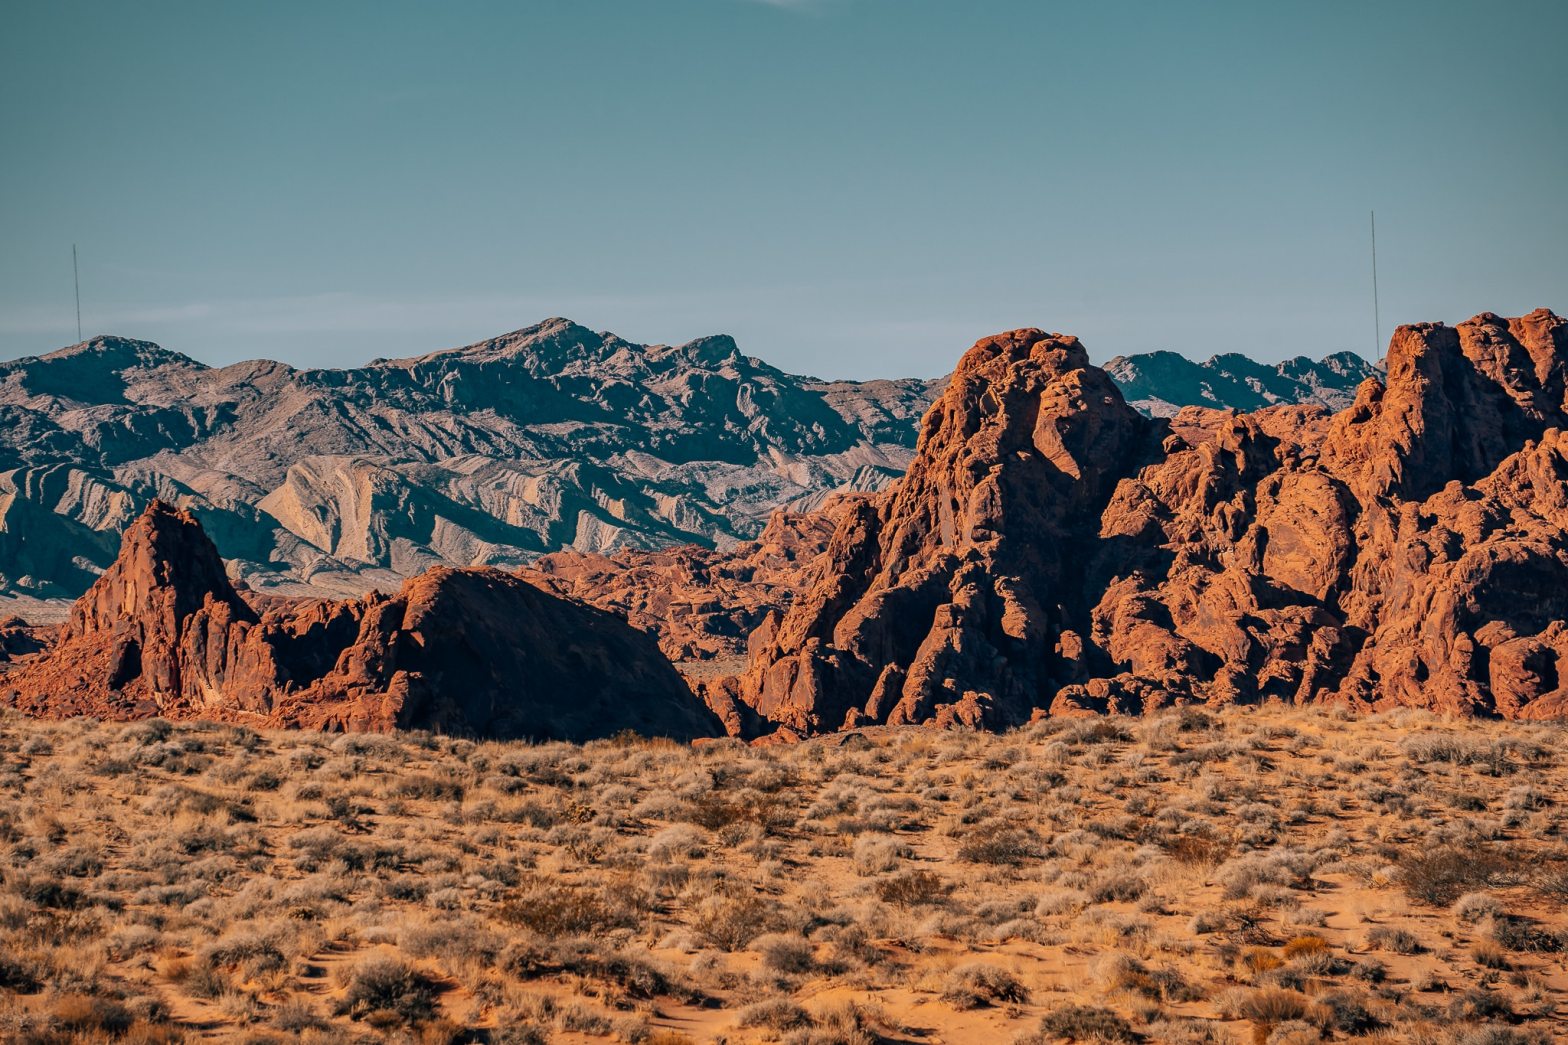 Mountain and rocky layers at Valley of Fire State Park with the red rocks in front and the mountains in the background